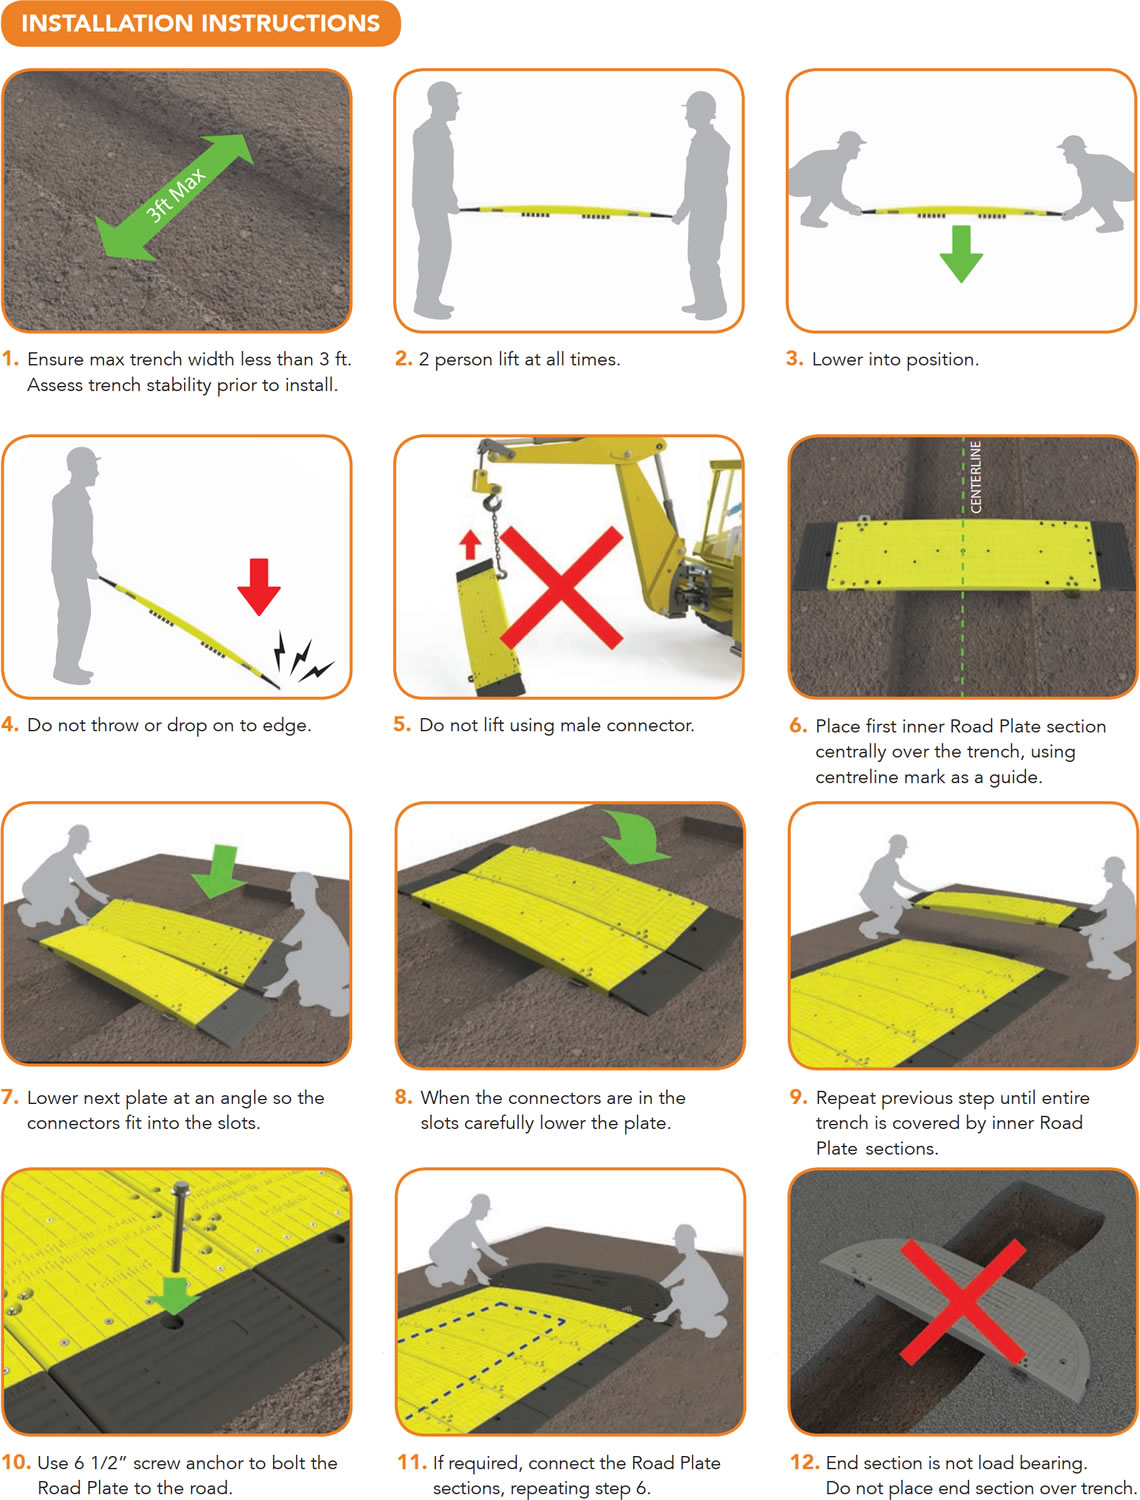 Instructions on how to install Oxford Low Pro 23/05 Road Plate